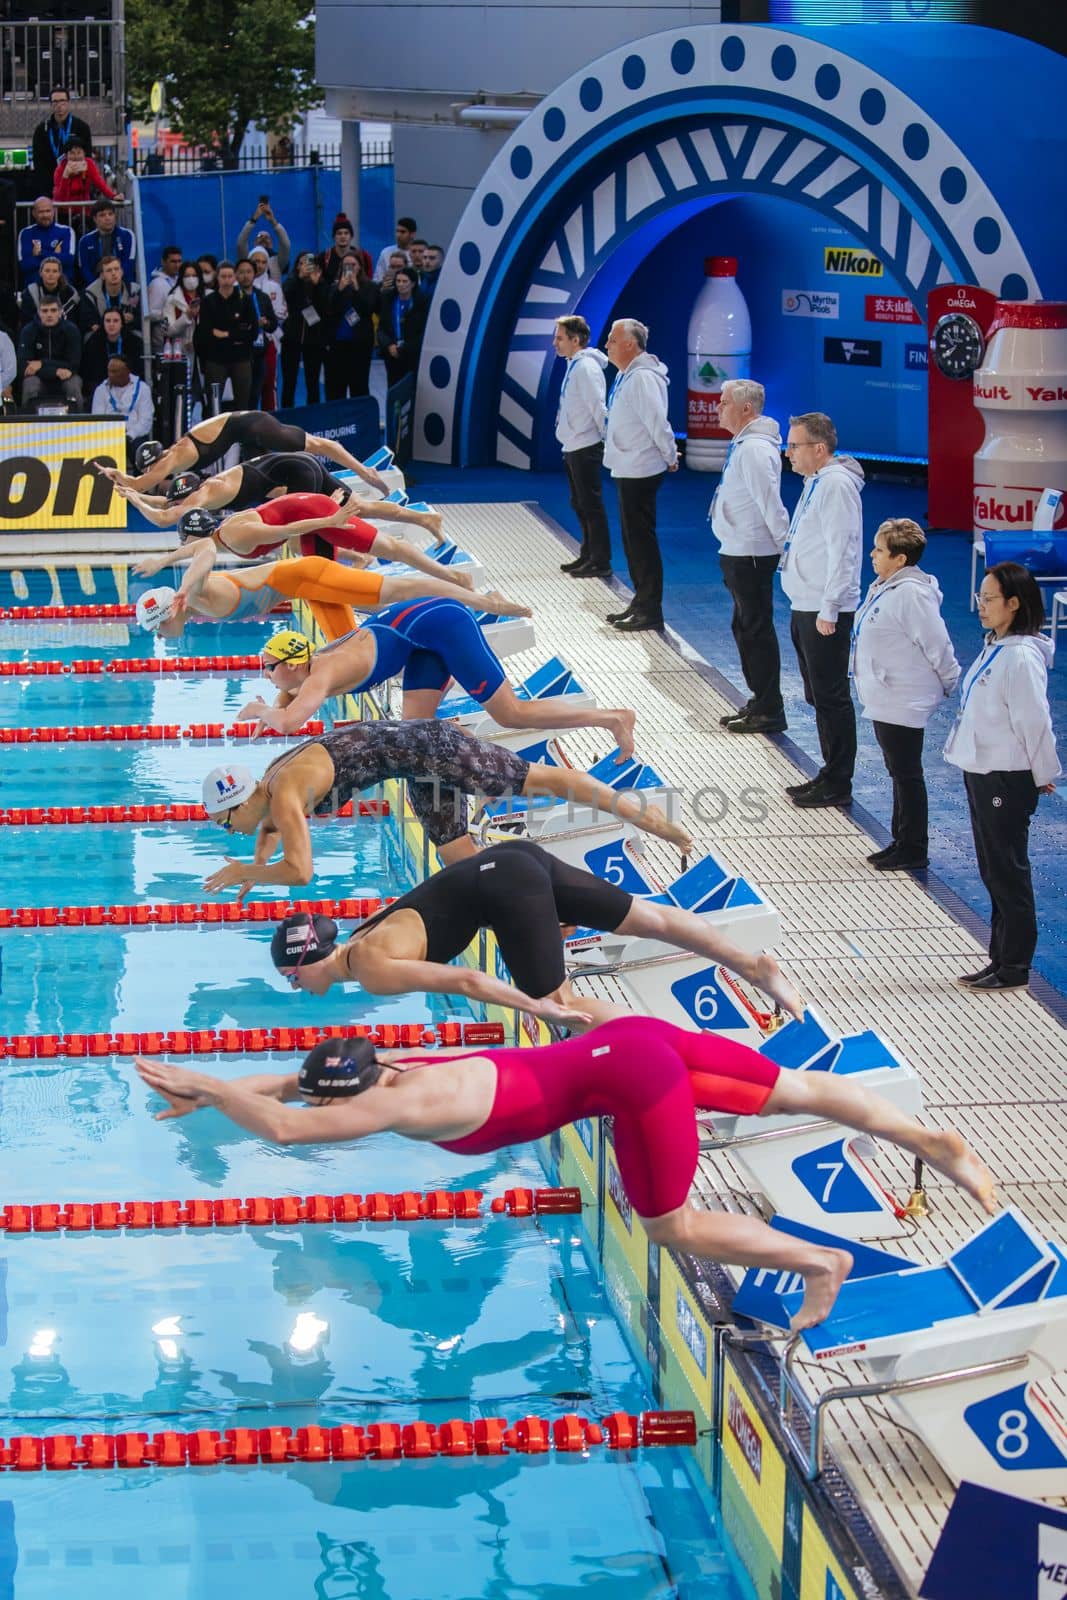 Melbourne 2022 FINA World Short Course Swimming Championships - Day 1 by FiledIMAGE